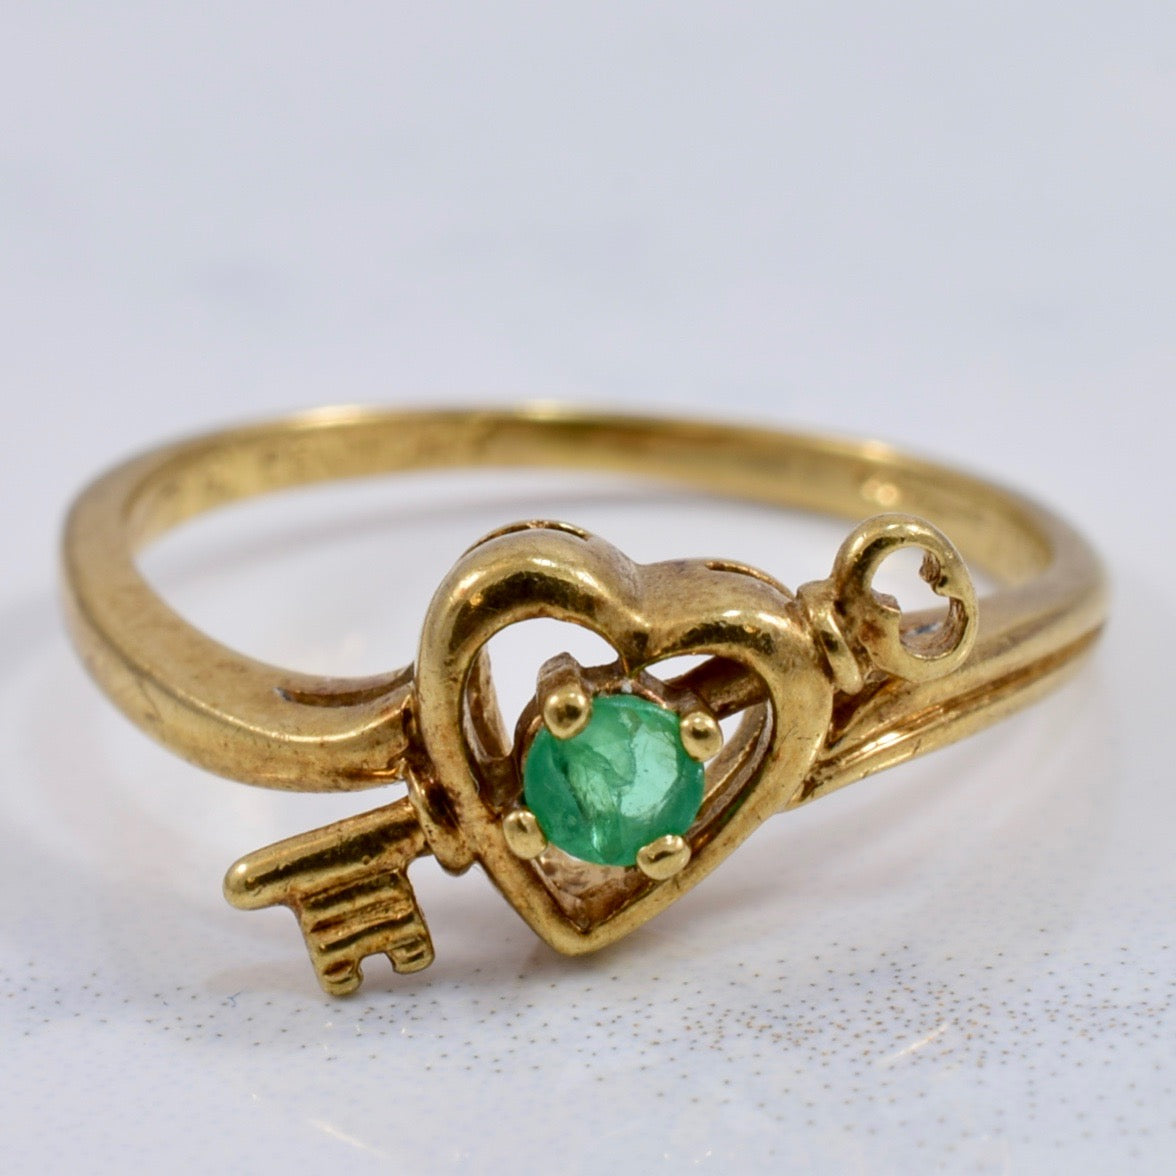 Key To My Heart Ring with Emerald | 0.06 ct SZ 4.5 |